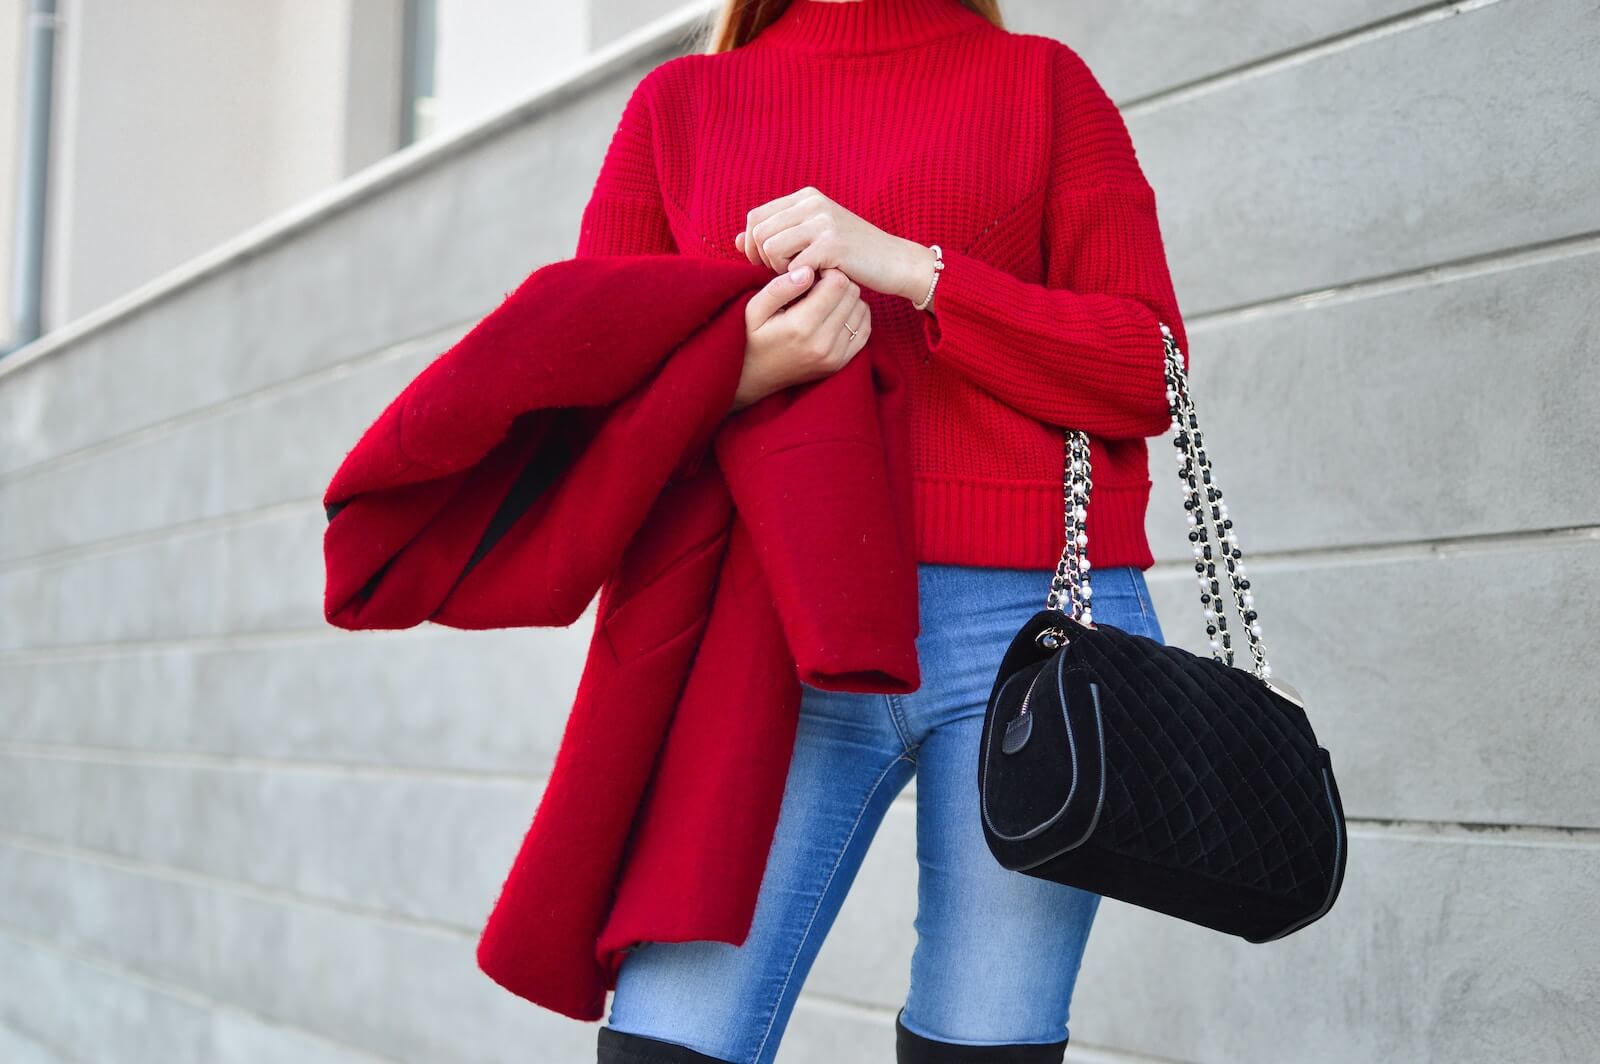 A woman in a red sweater holding a red coat